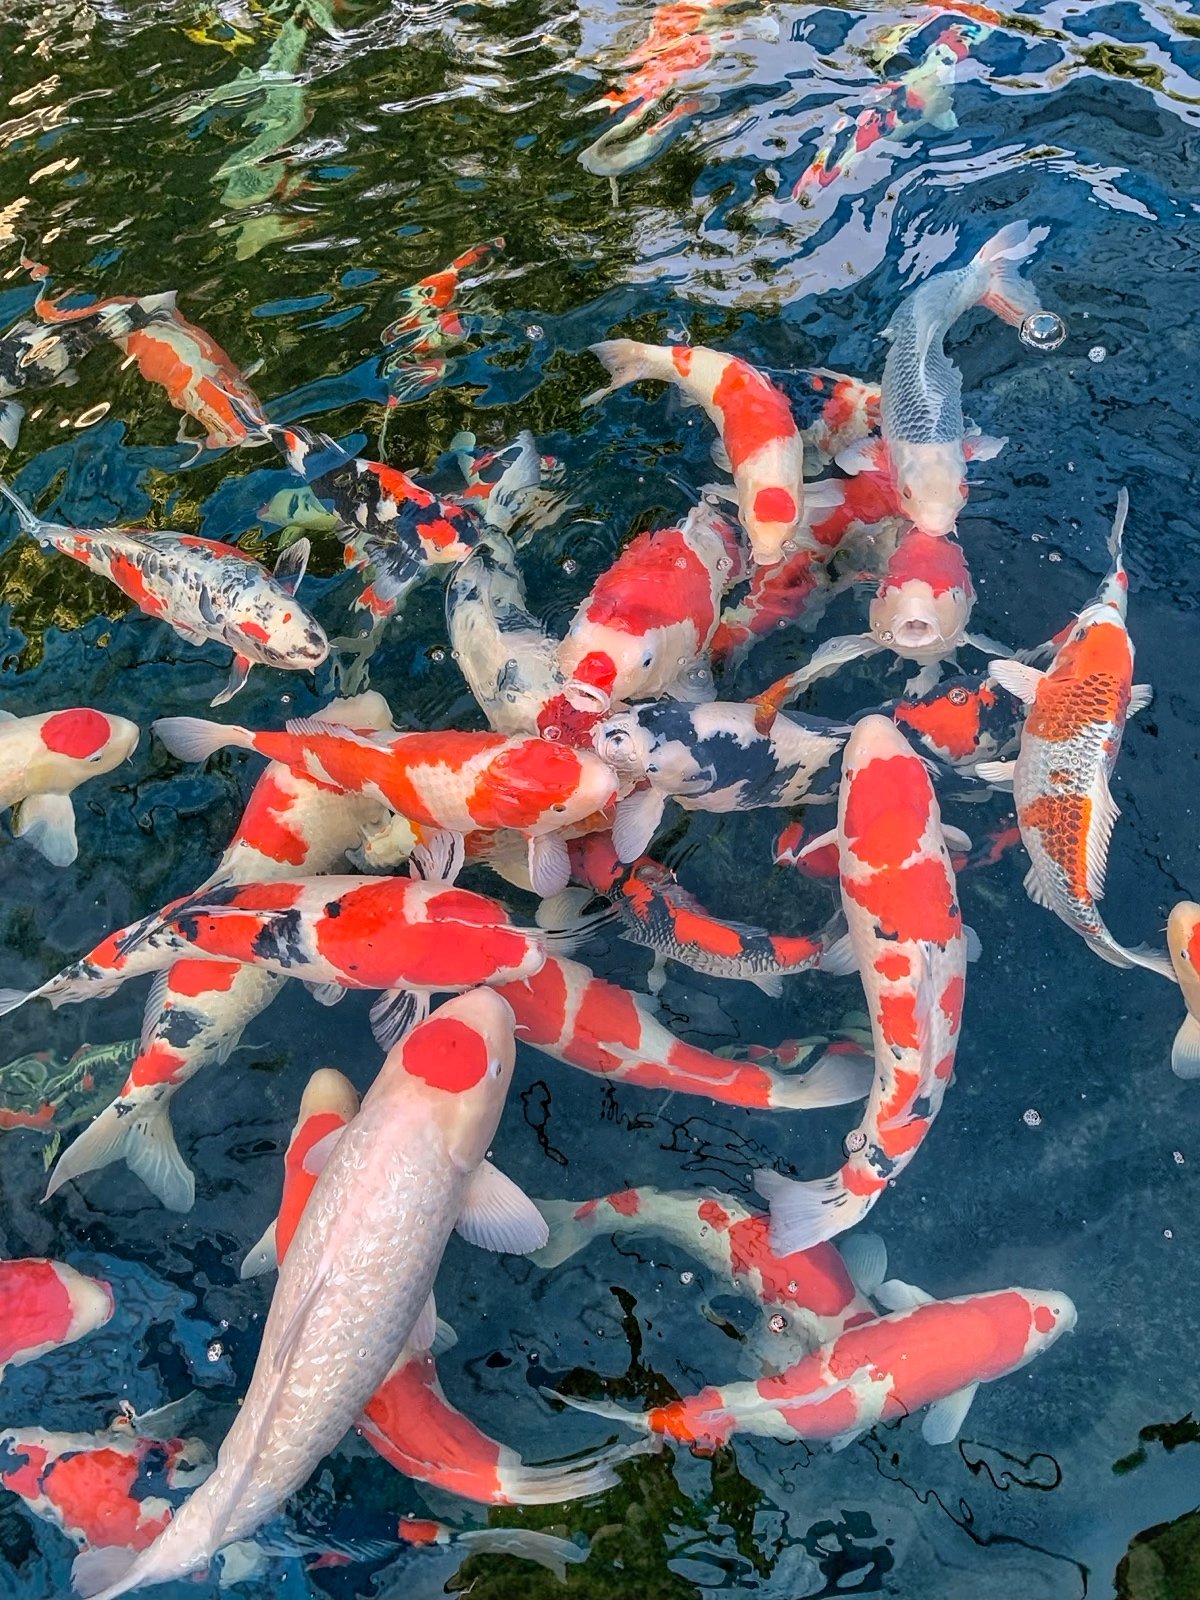 Your koi’s diet should contain approximately 35% to 40% protein and be supplemented with fruits and vegetables to provide other essential vitamins as well as carbohydrates and lipids. Some solid choices include peas, squash, spinach, citrus fruit.